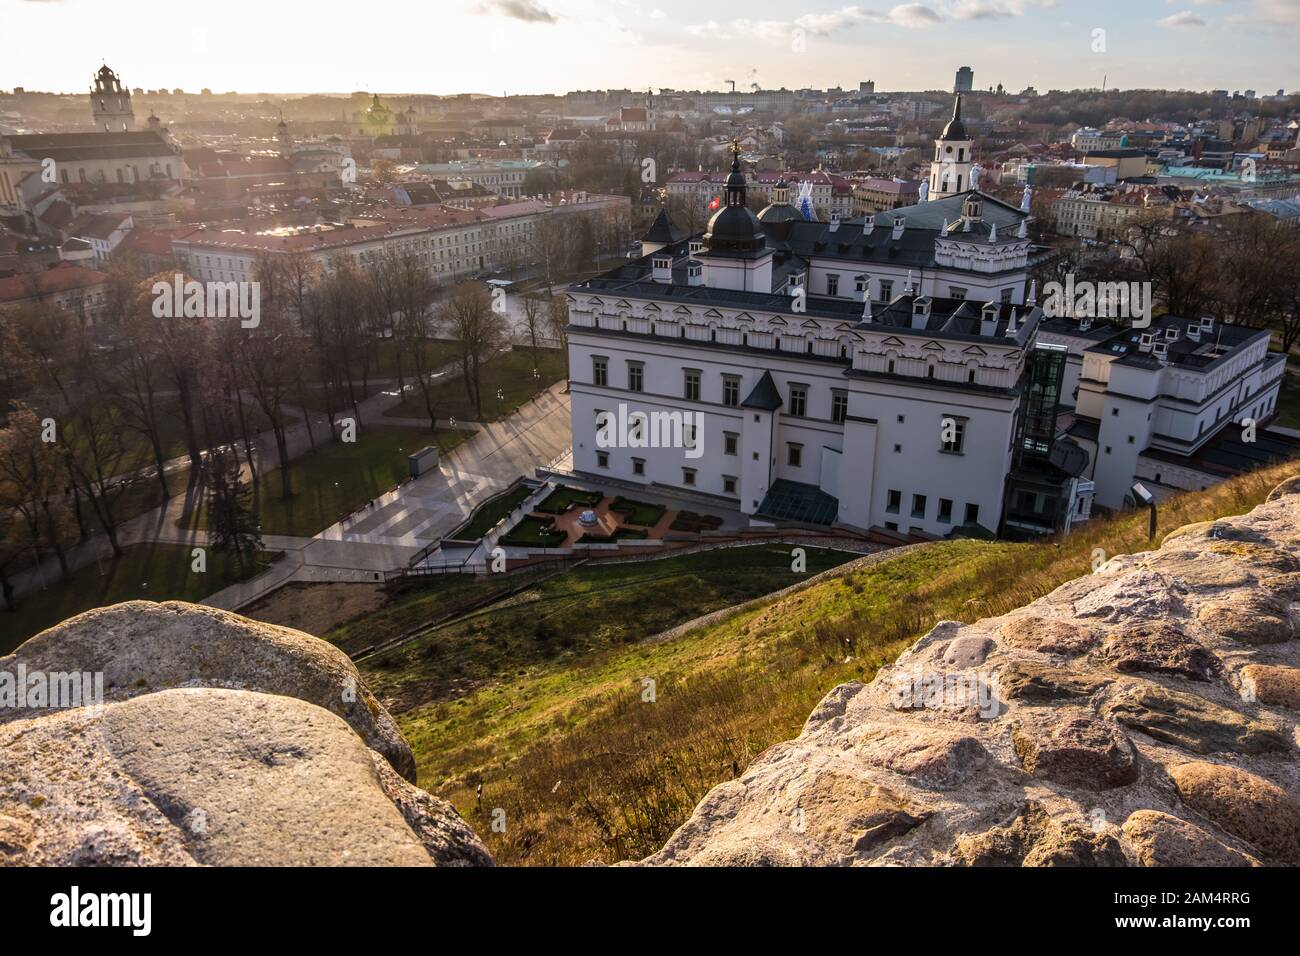 Vilnius, Lithuania - December 16, 2019: View of Lithuanian Royal Palace in Vilnius from the Hill of Upper Vilna Castle Stock Photo